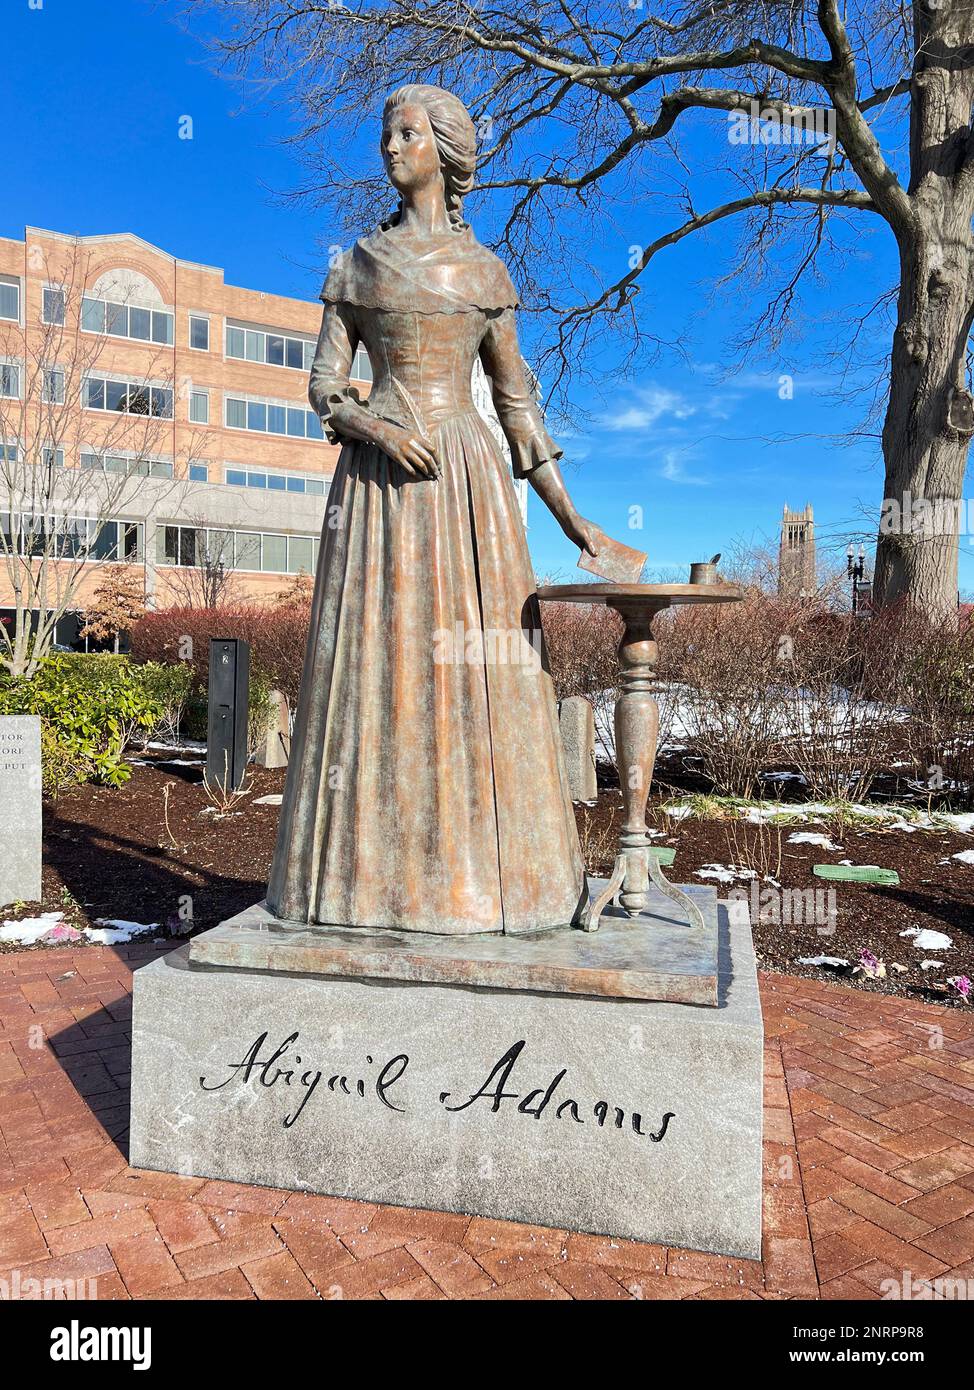 Abigail Adams statue sculpted by Sergey Eylanbekov in Quincy Massachusetts Stock Photo